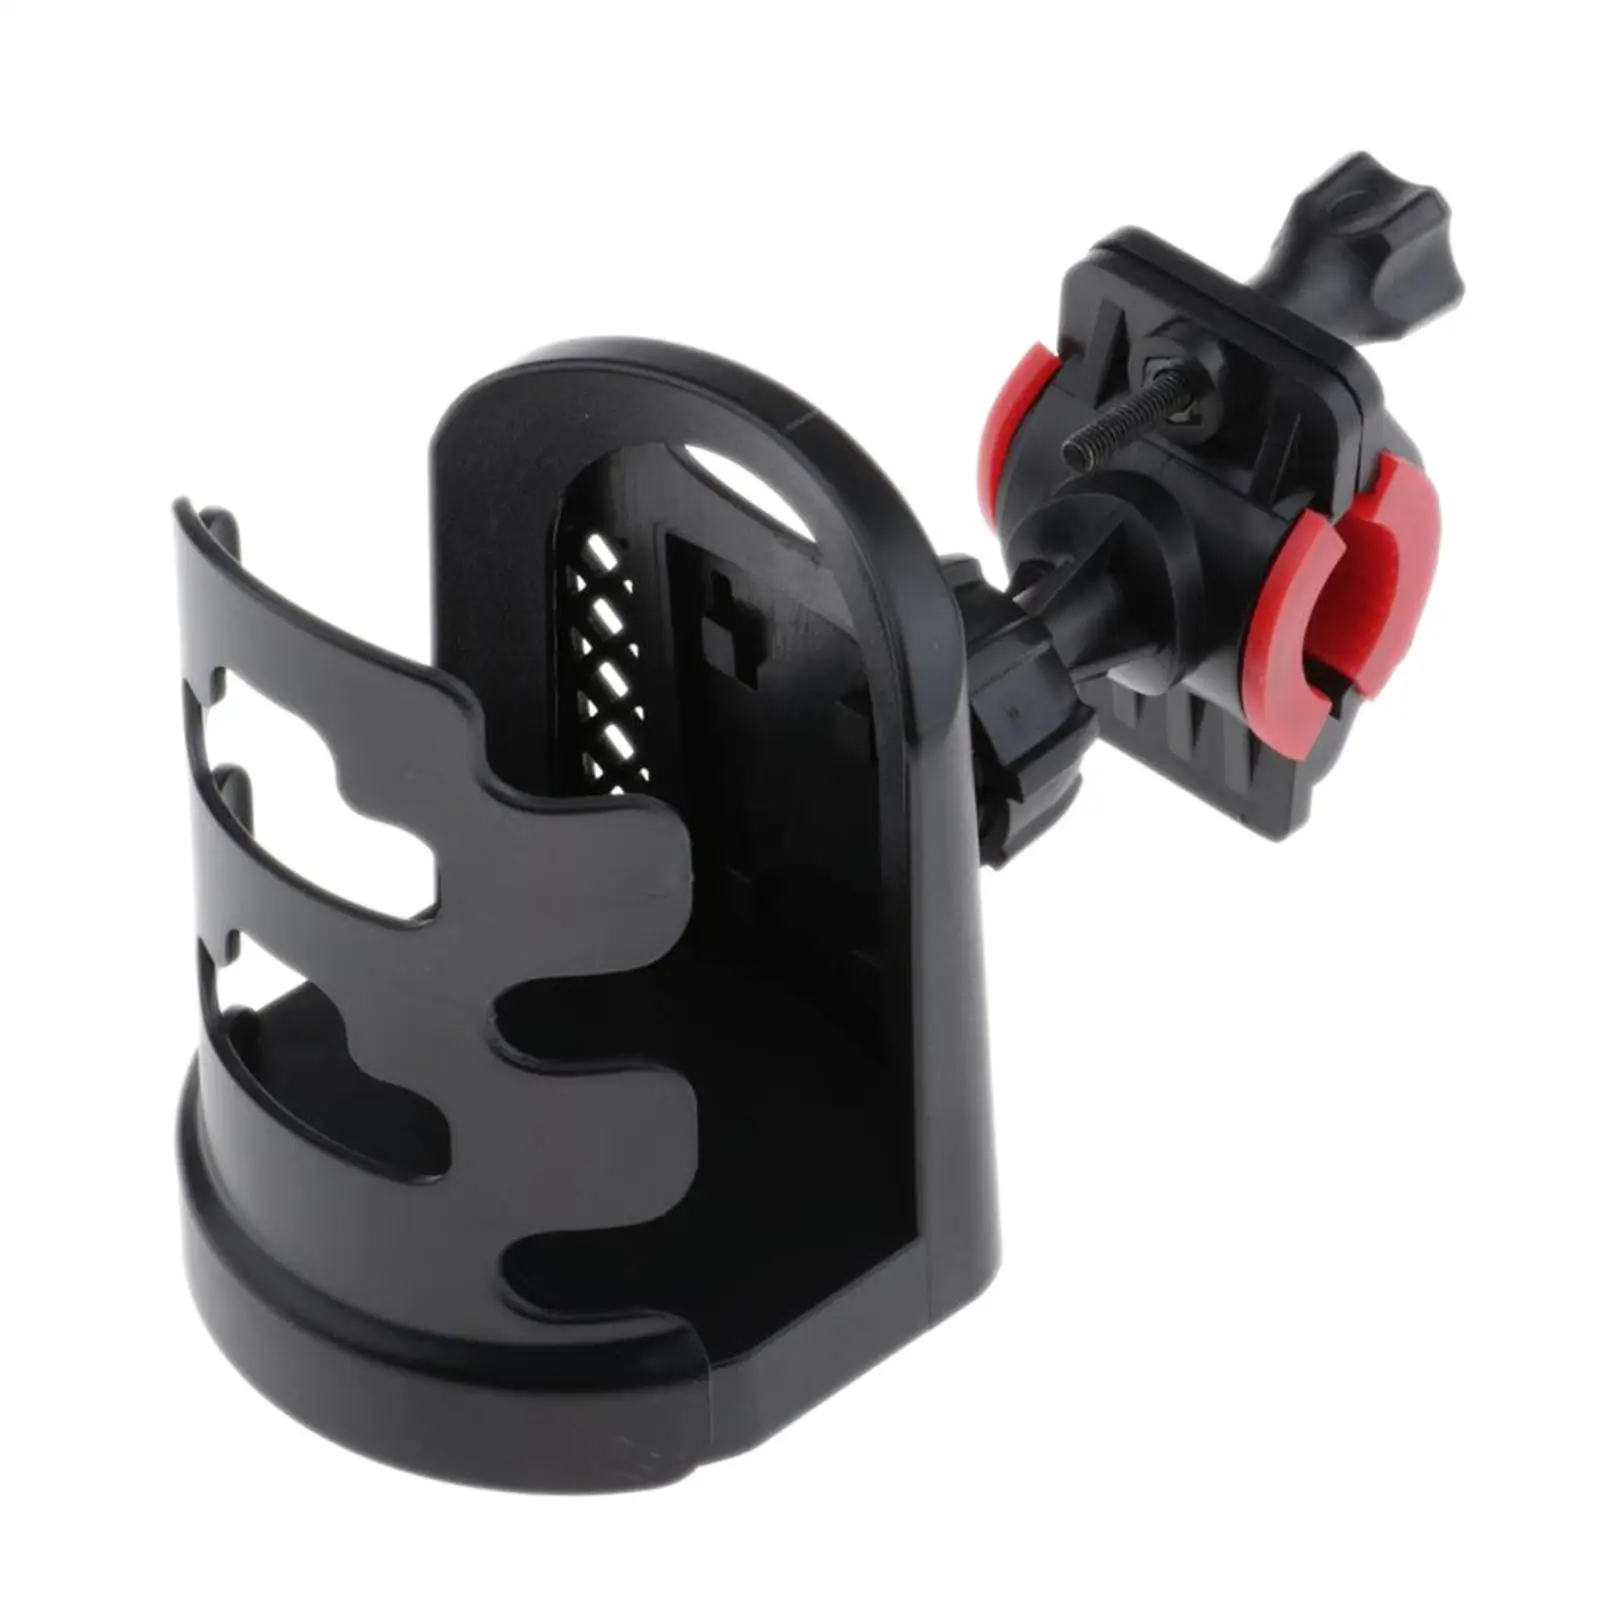 1 Pieces Universal Water Cup Holder Bracket for Motorcycles Vehicle Car